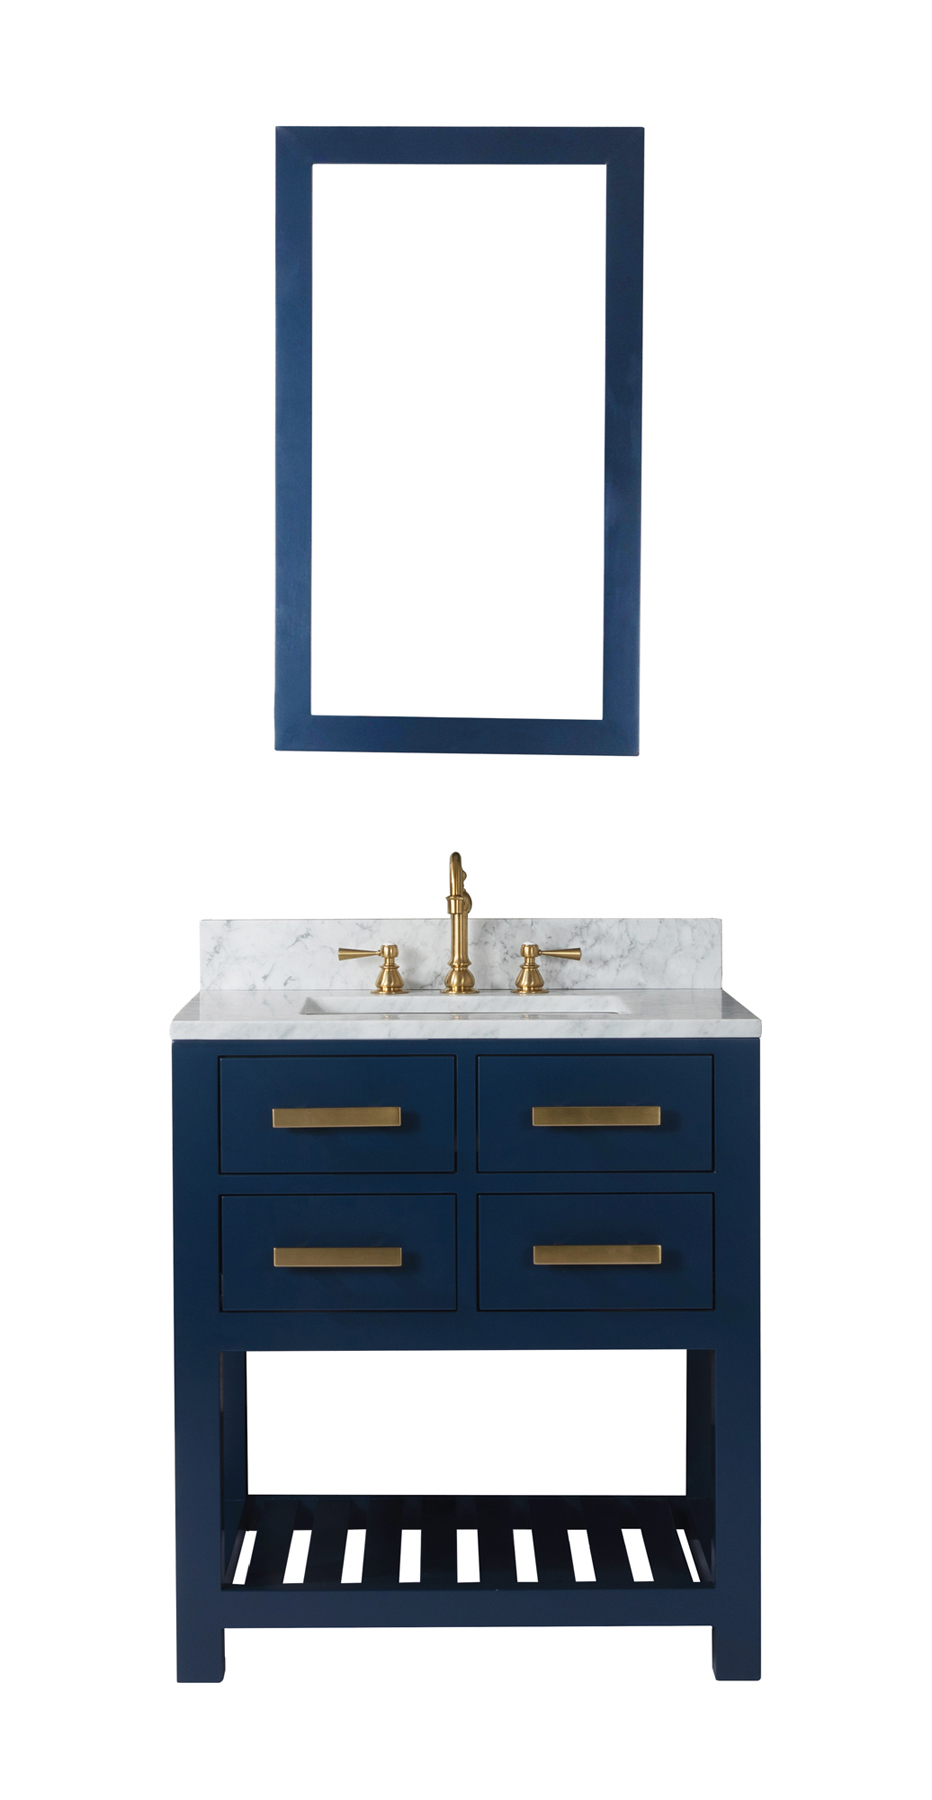 30 Inch Monarch Blue Single Sink Bathroom Vanity With Mirror From The Madalyn Collection